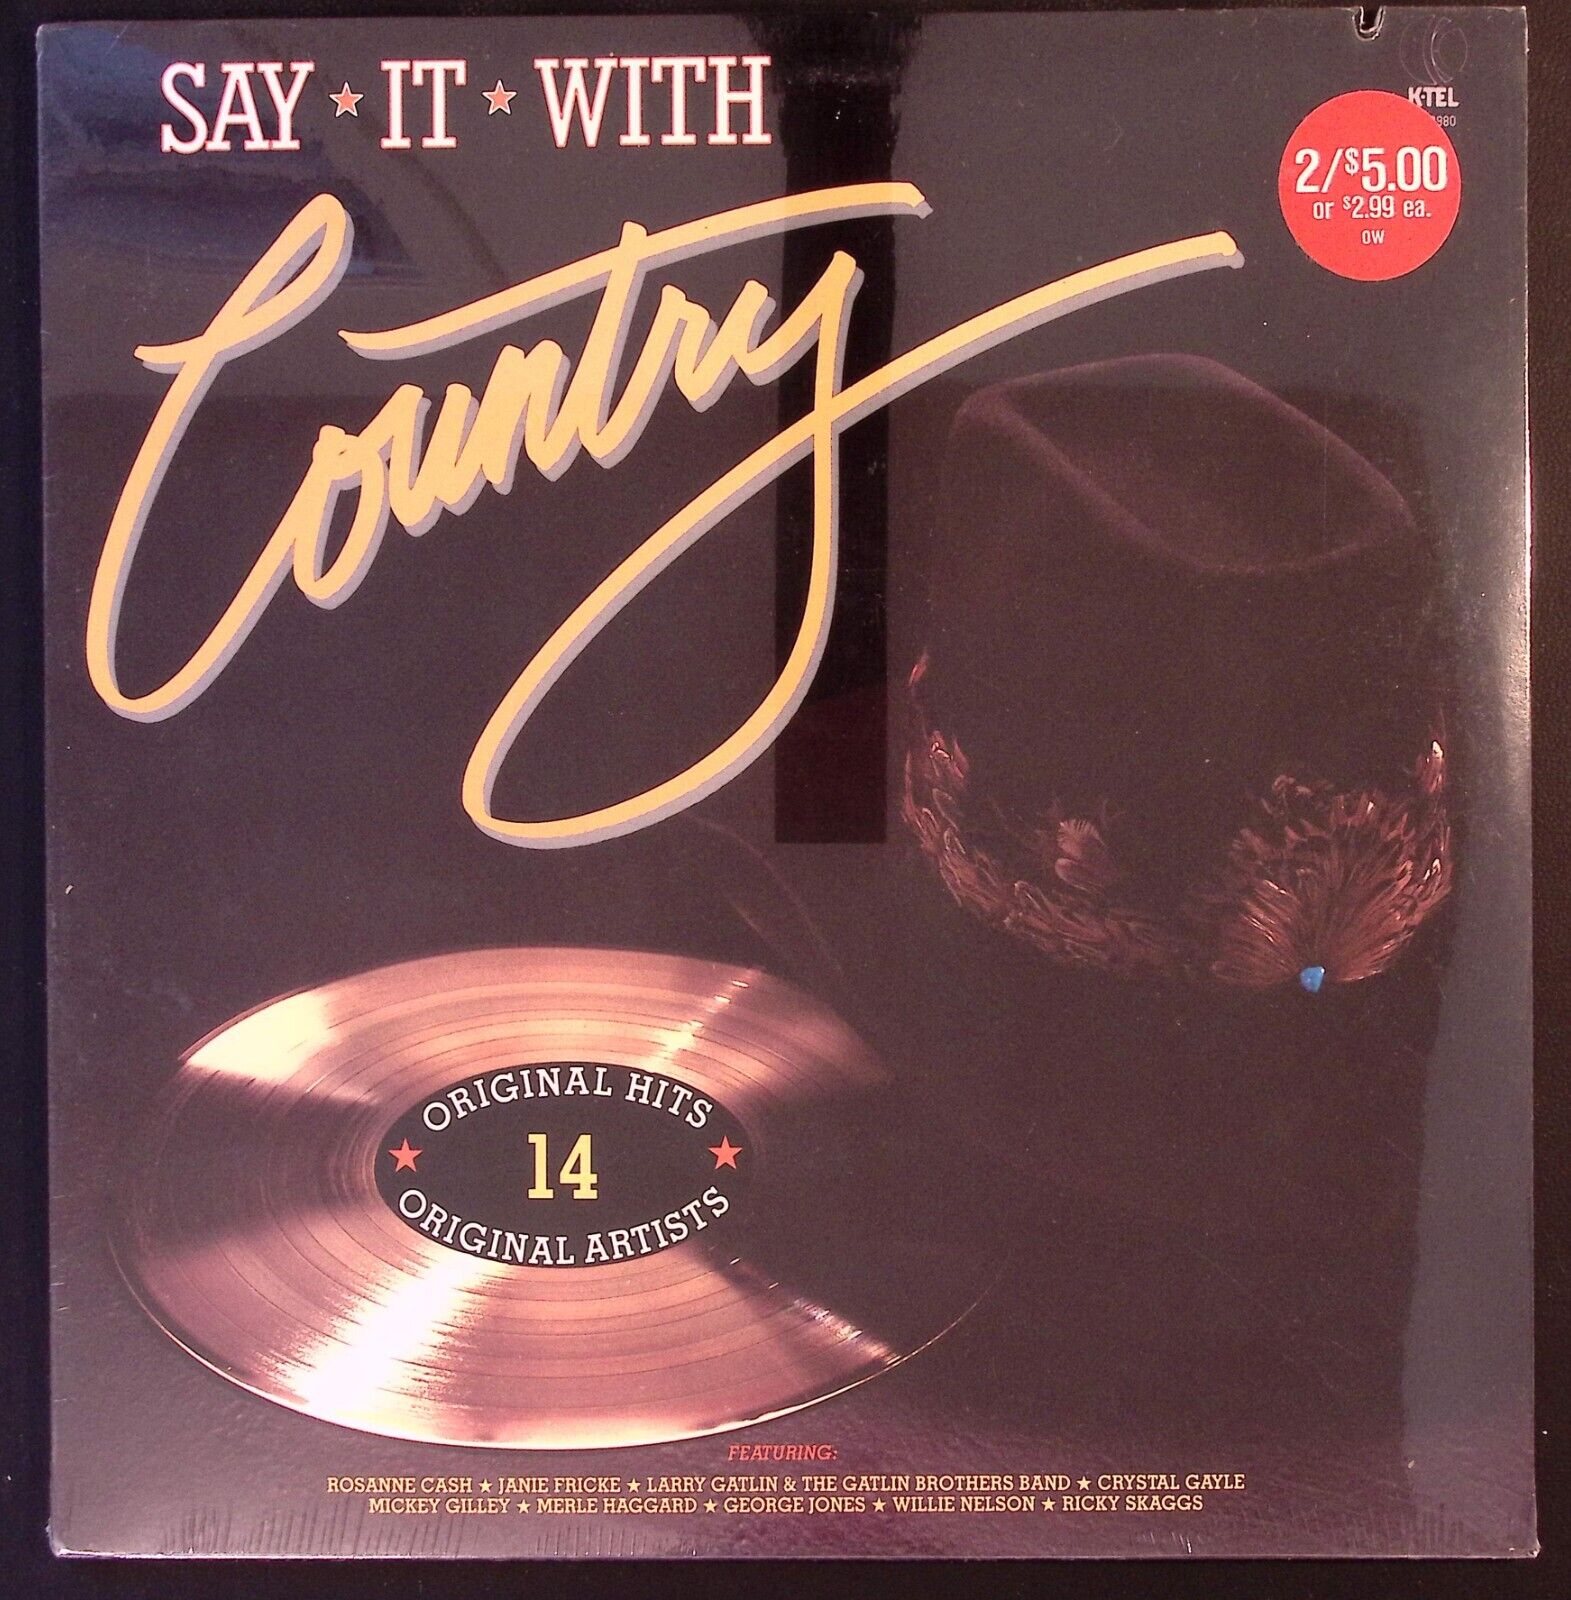 SAY IT WITH COUNTRY 14 ORIGINAL HITS CBS   RARE STILL SEALED  VINYL LP 110-87W